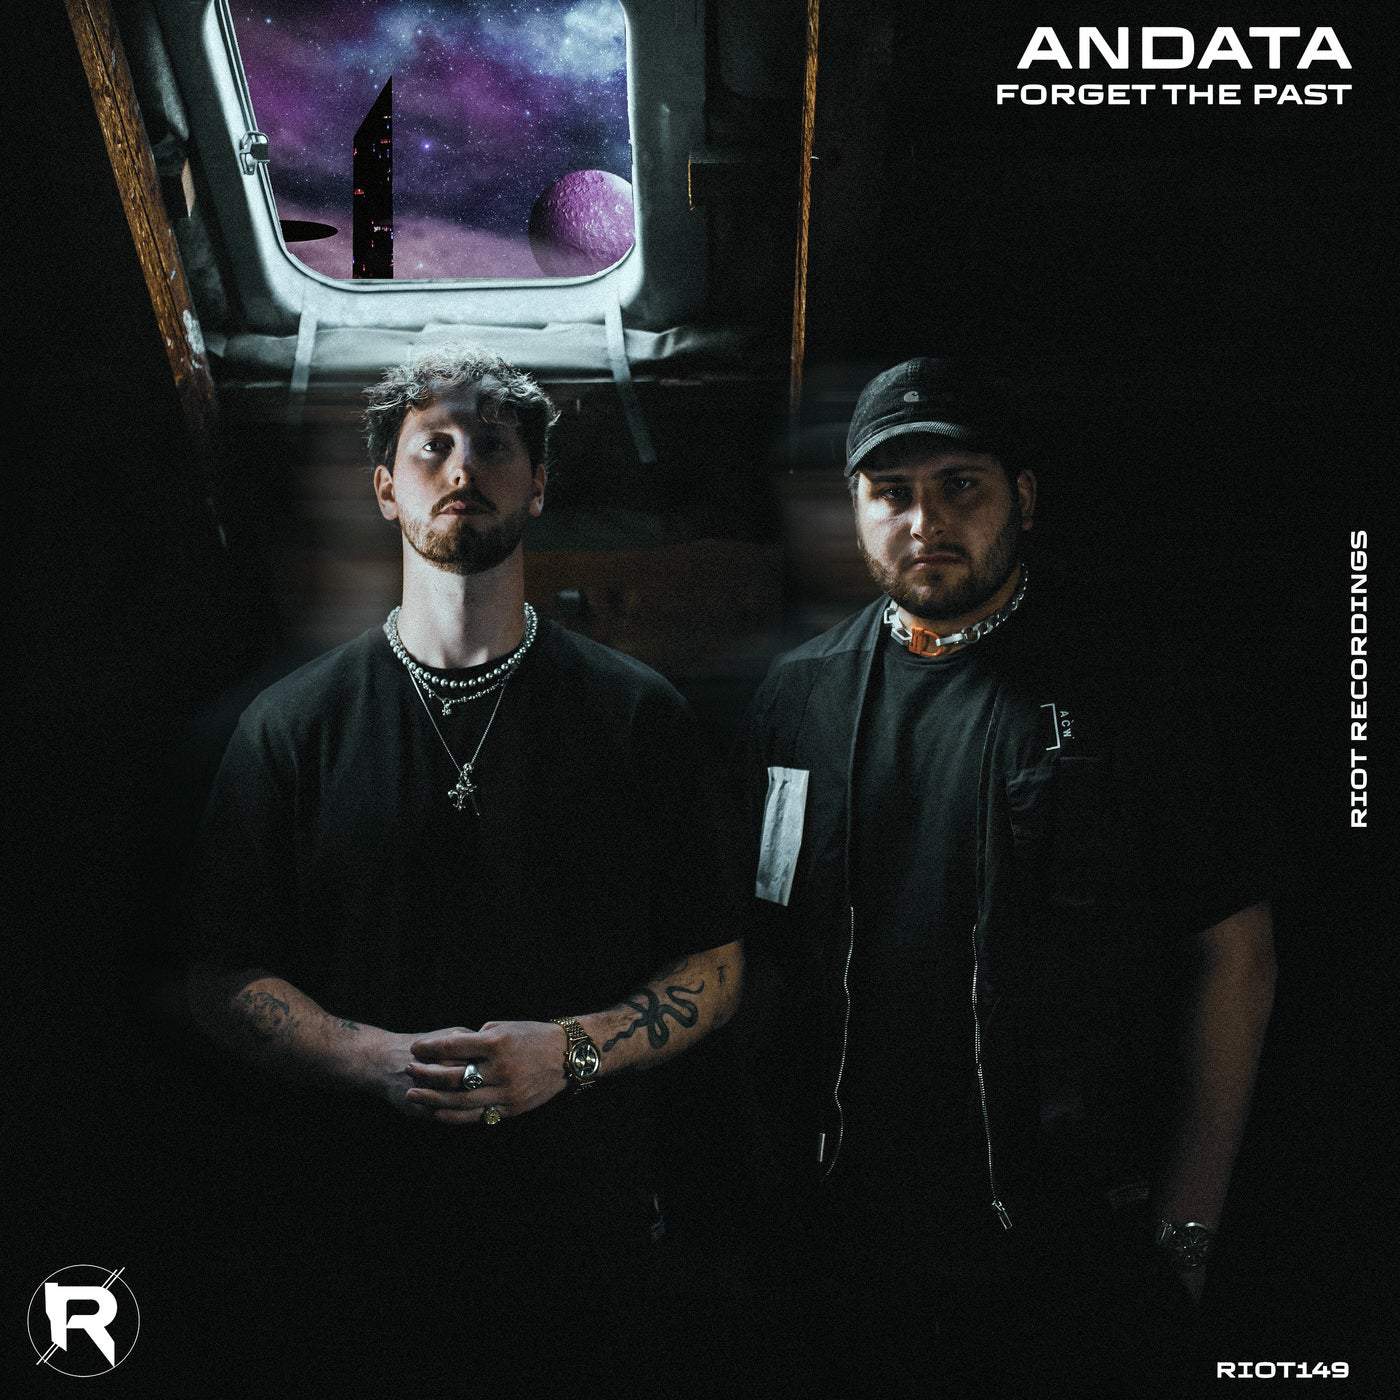 image cover: ANDATA - Forget the Past / RIOT149